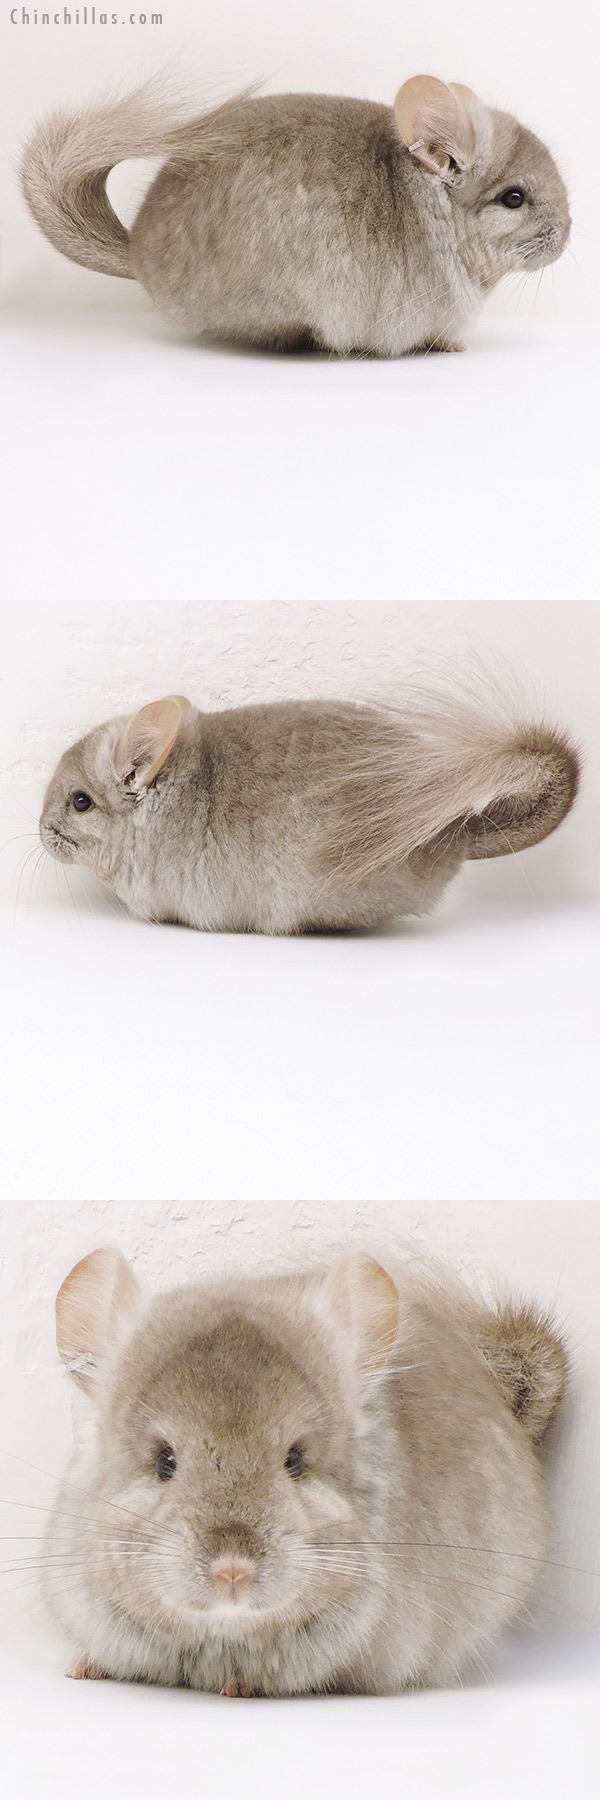 Chinchilla or related item offered for sale or export on Chinchillas.com - 17233 Beige ( Ebony Carrier )  Royal Persian Angora Male Chinchilla